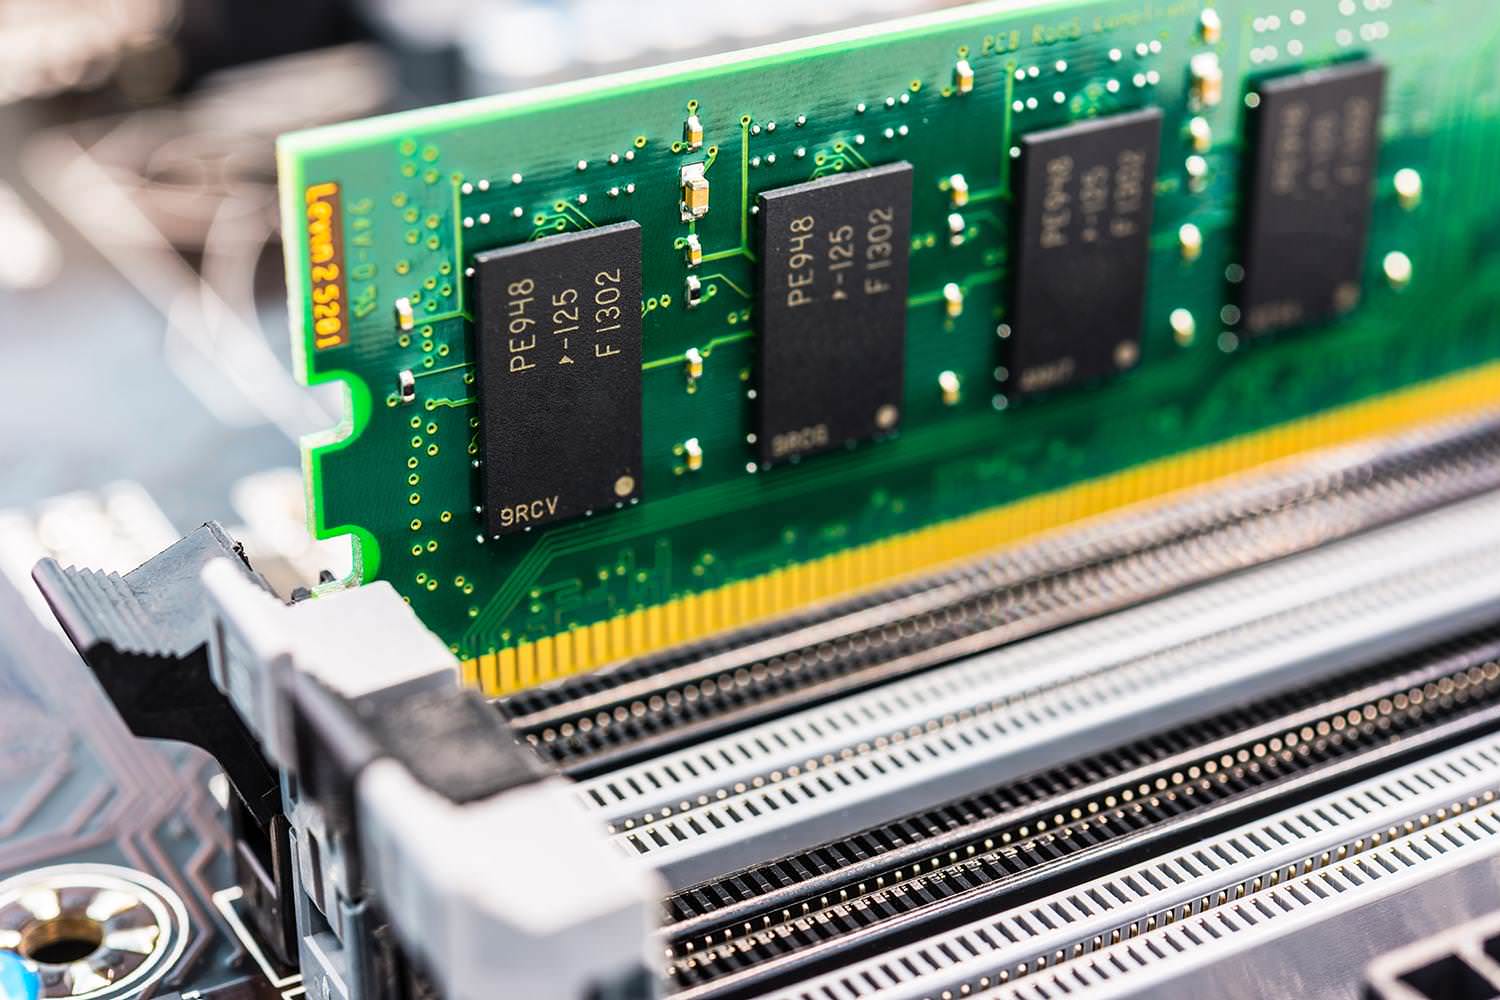 4 Free Tools To Test RAM Memory For Windows, Linux and Mac